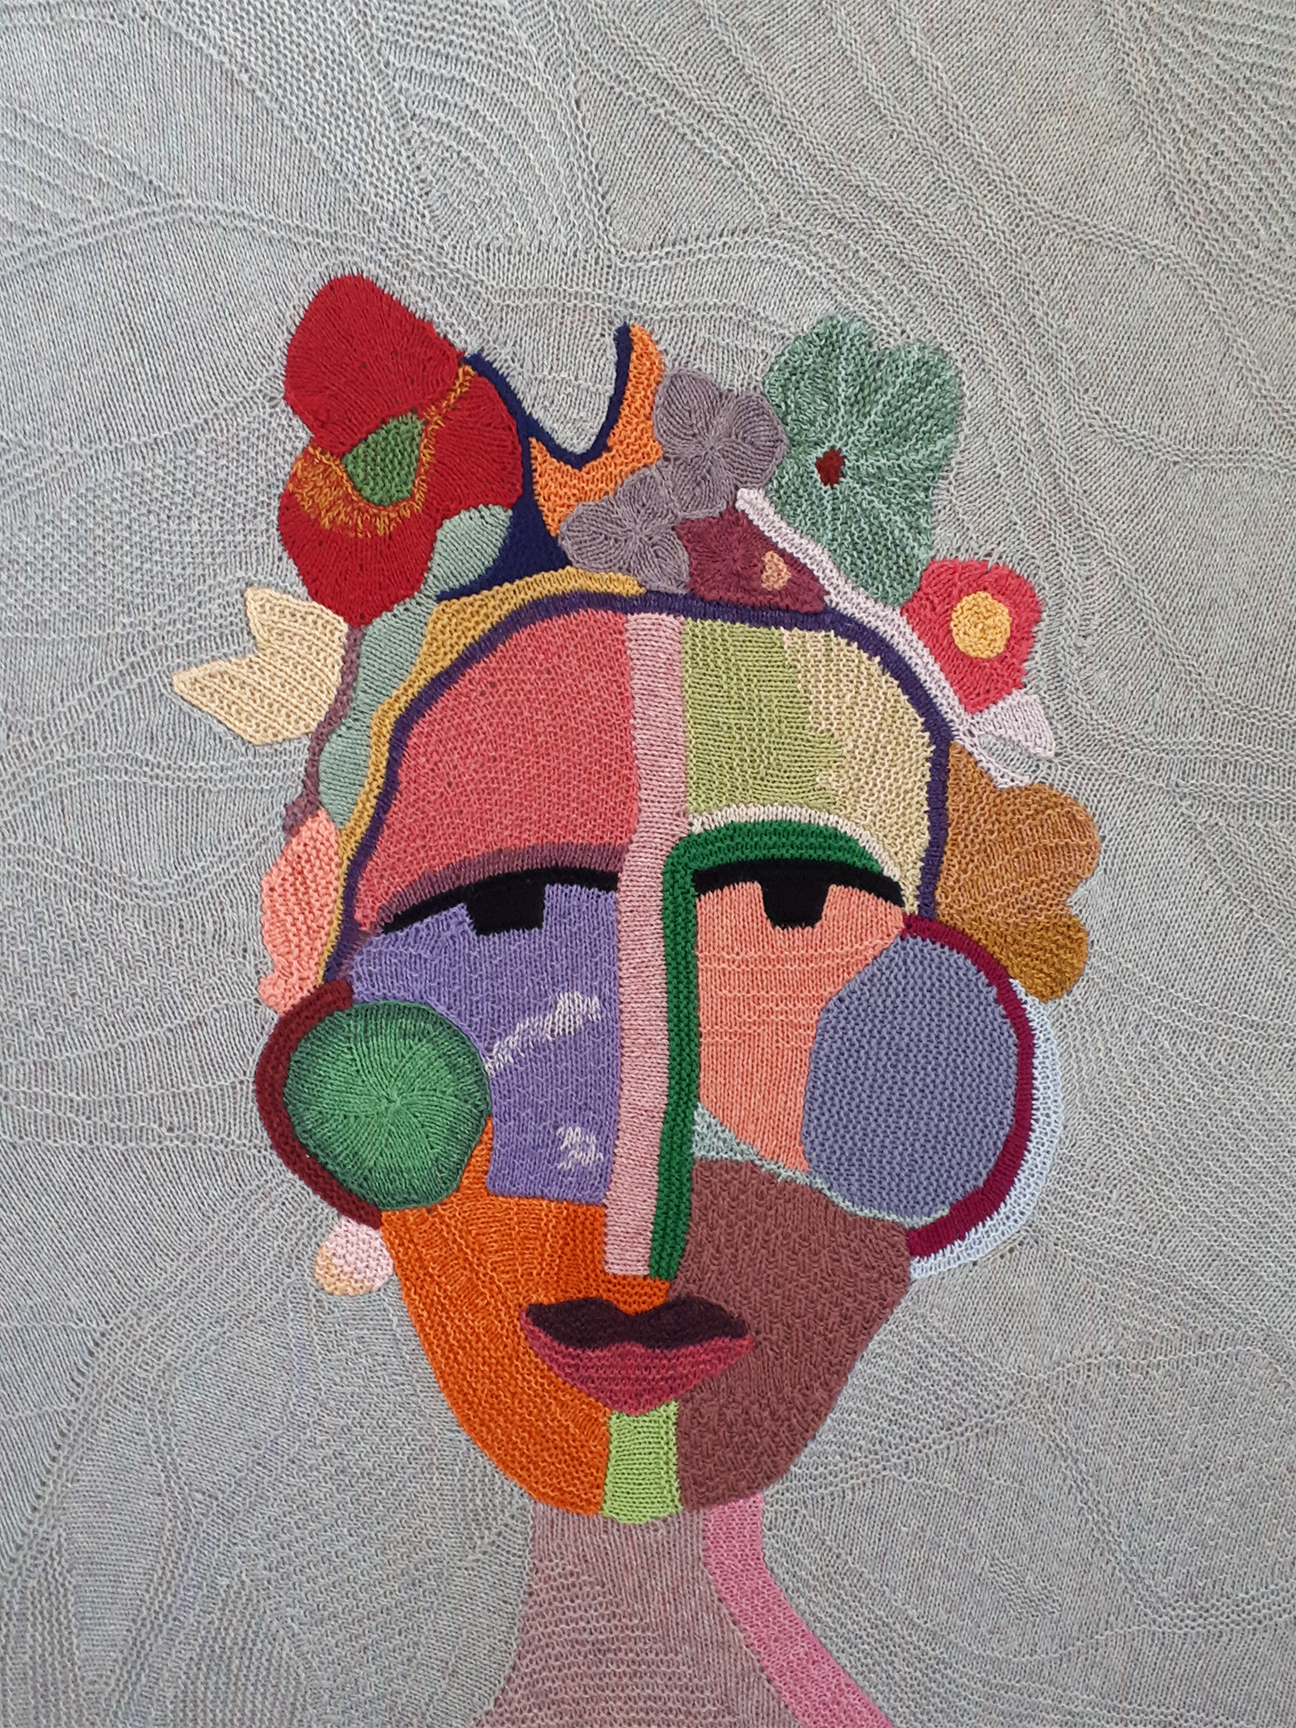 Knitted abstract portrait